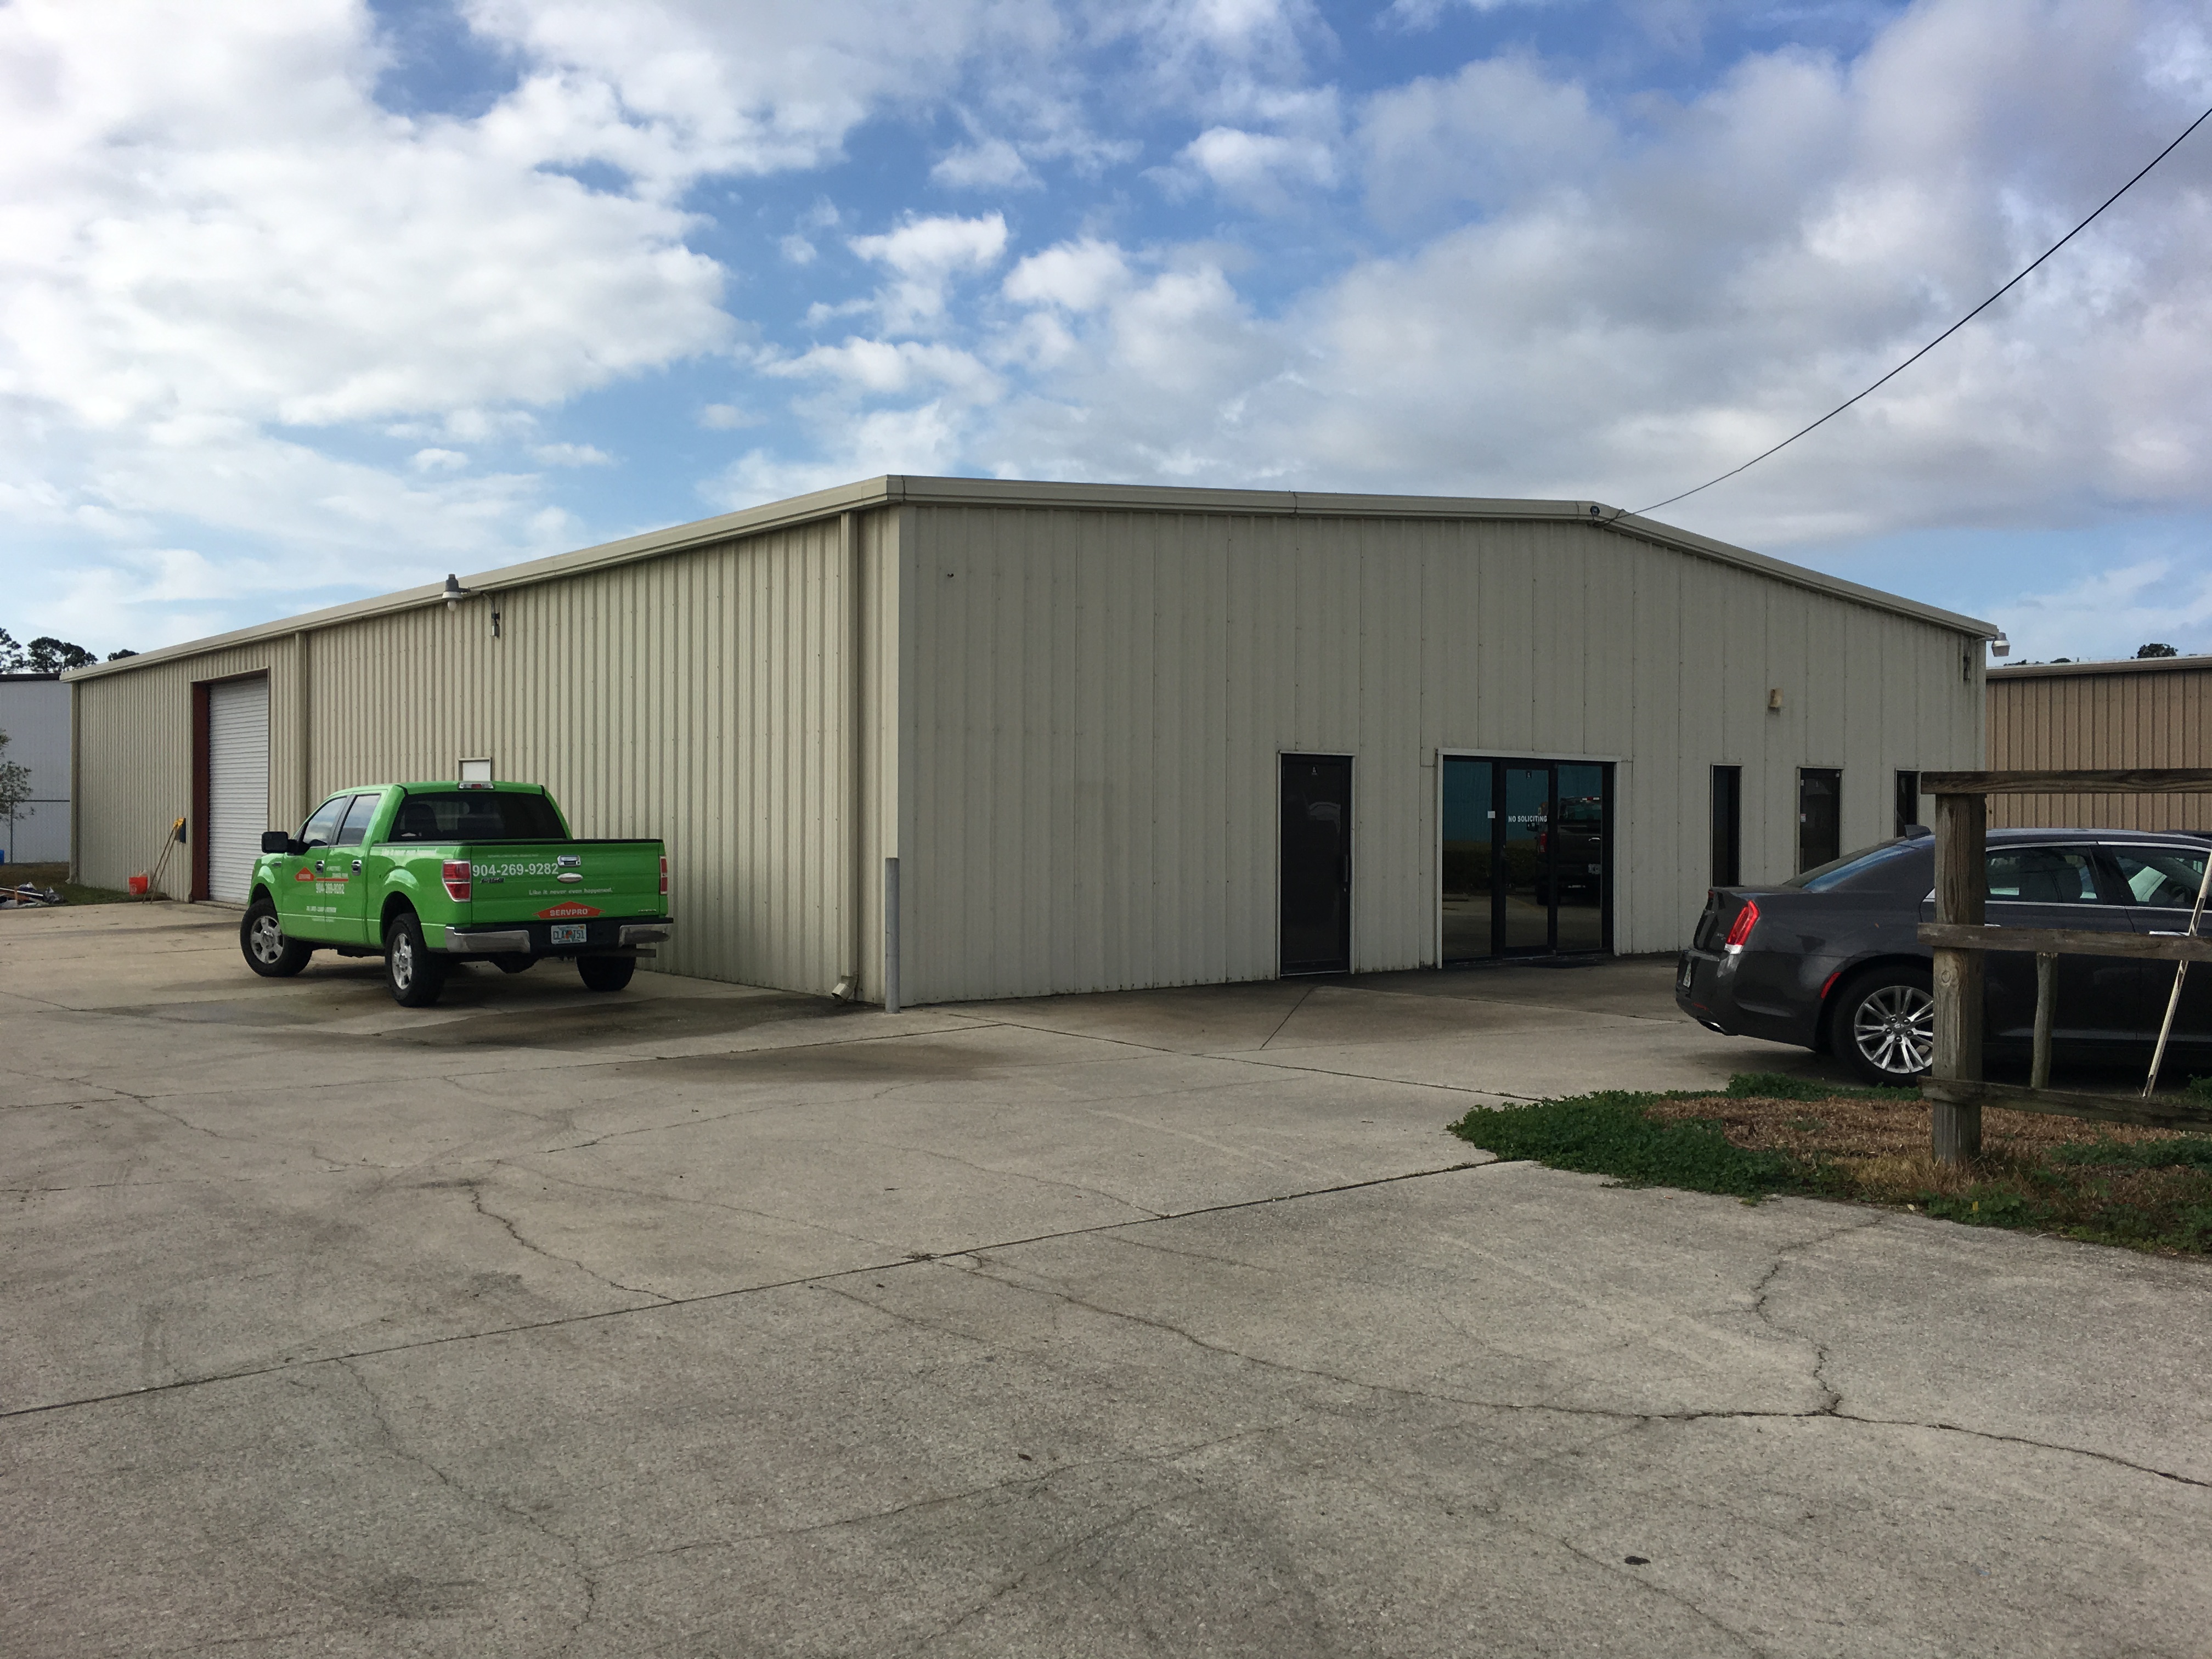 It's a beautiful day at the SERVPRO office!